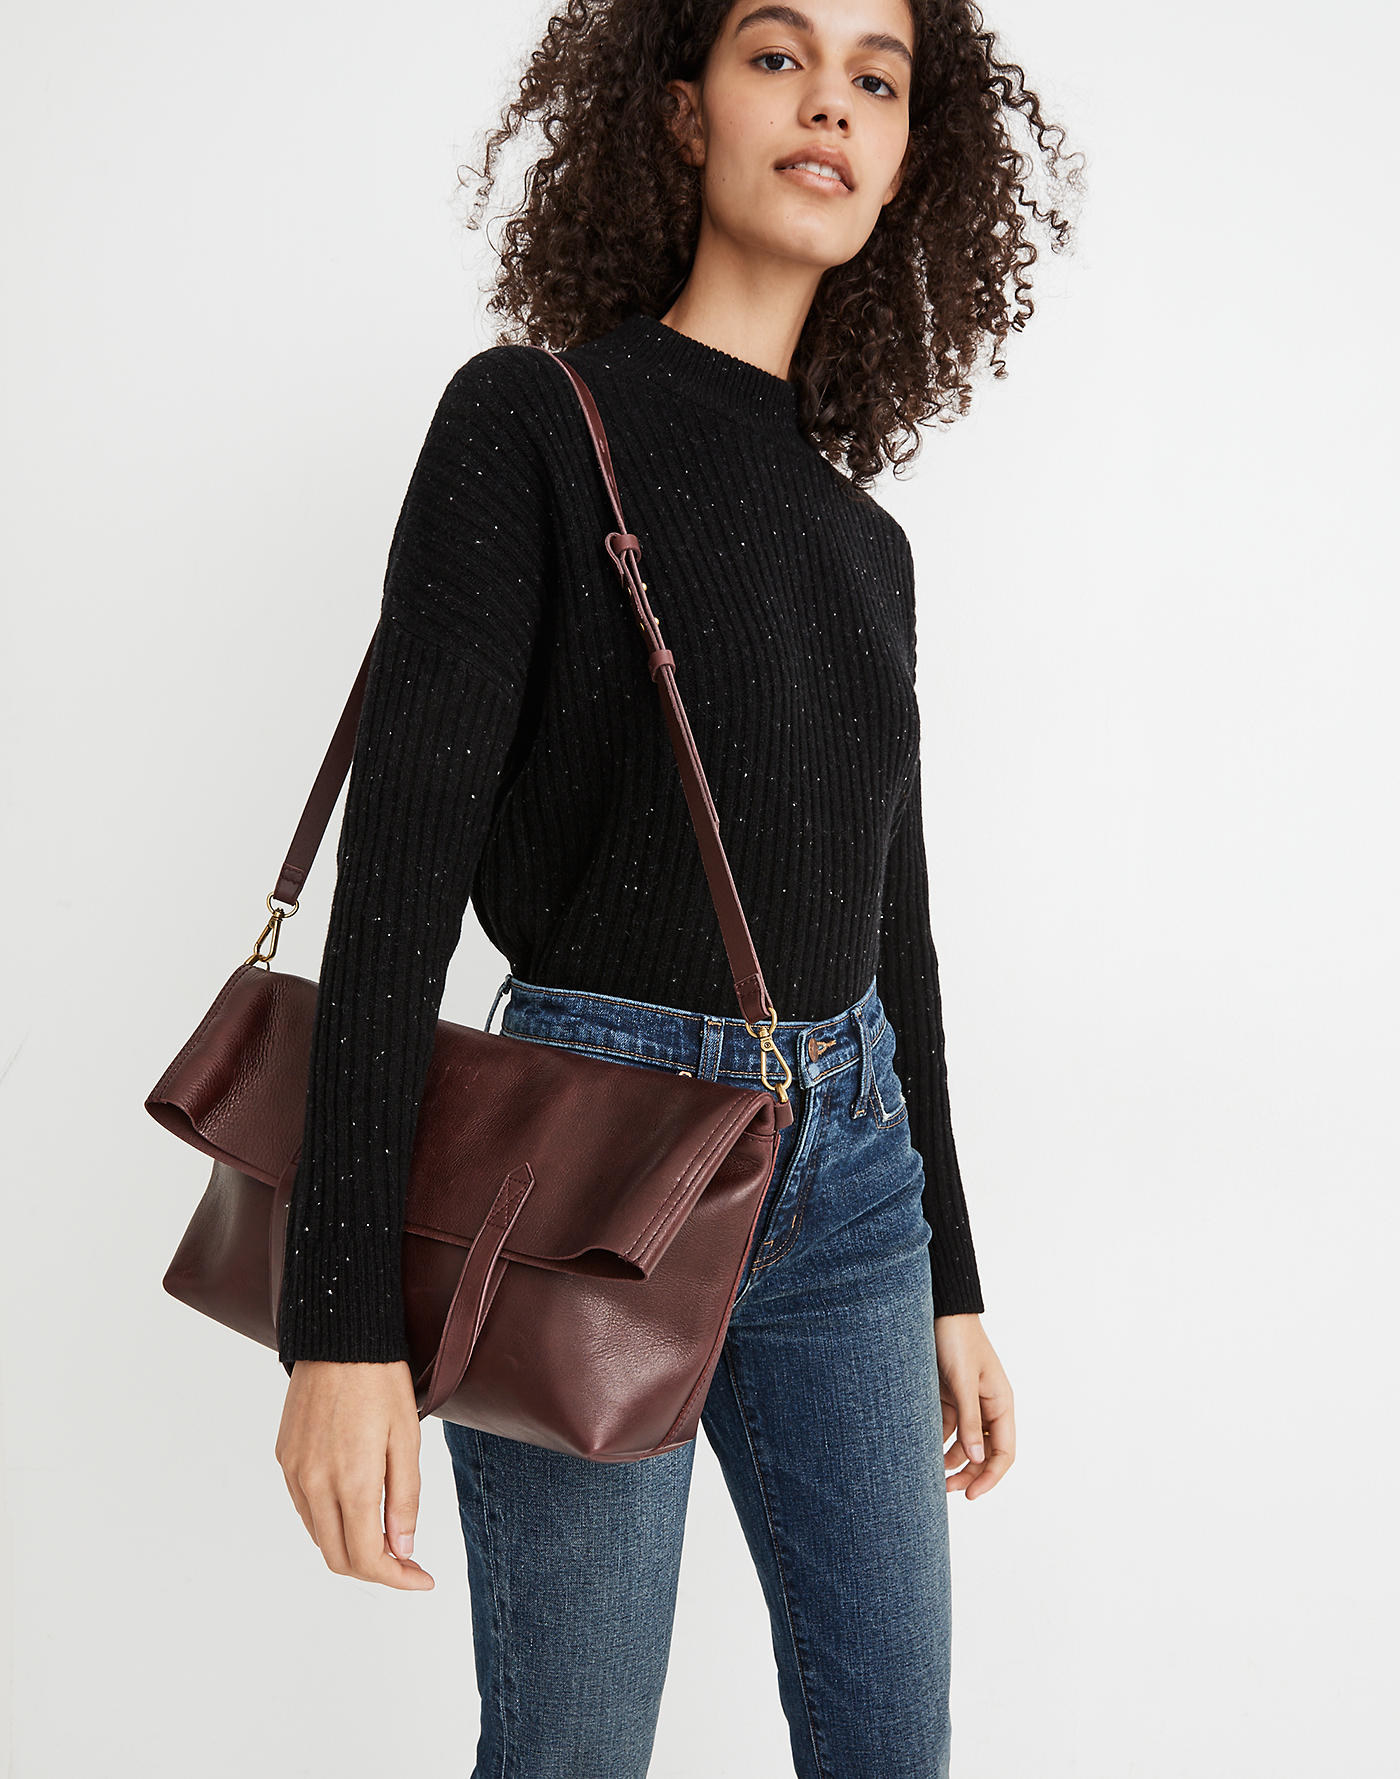 model carrying the dark red purse 